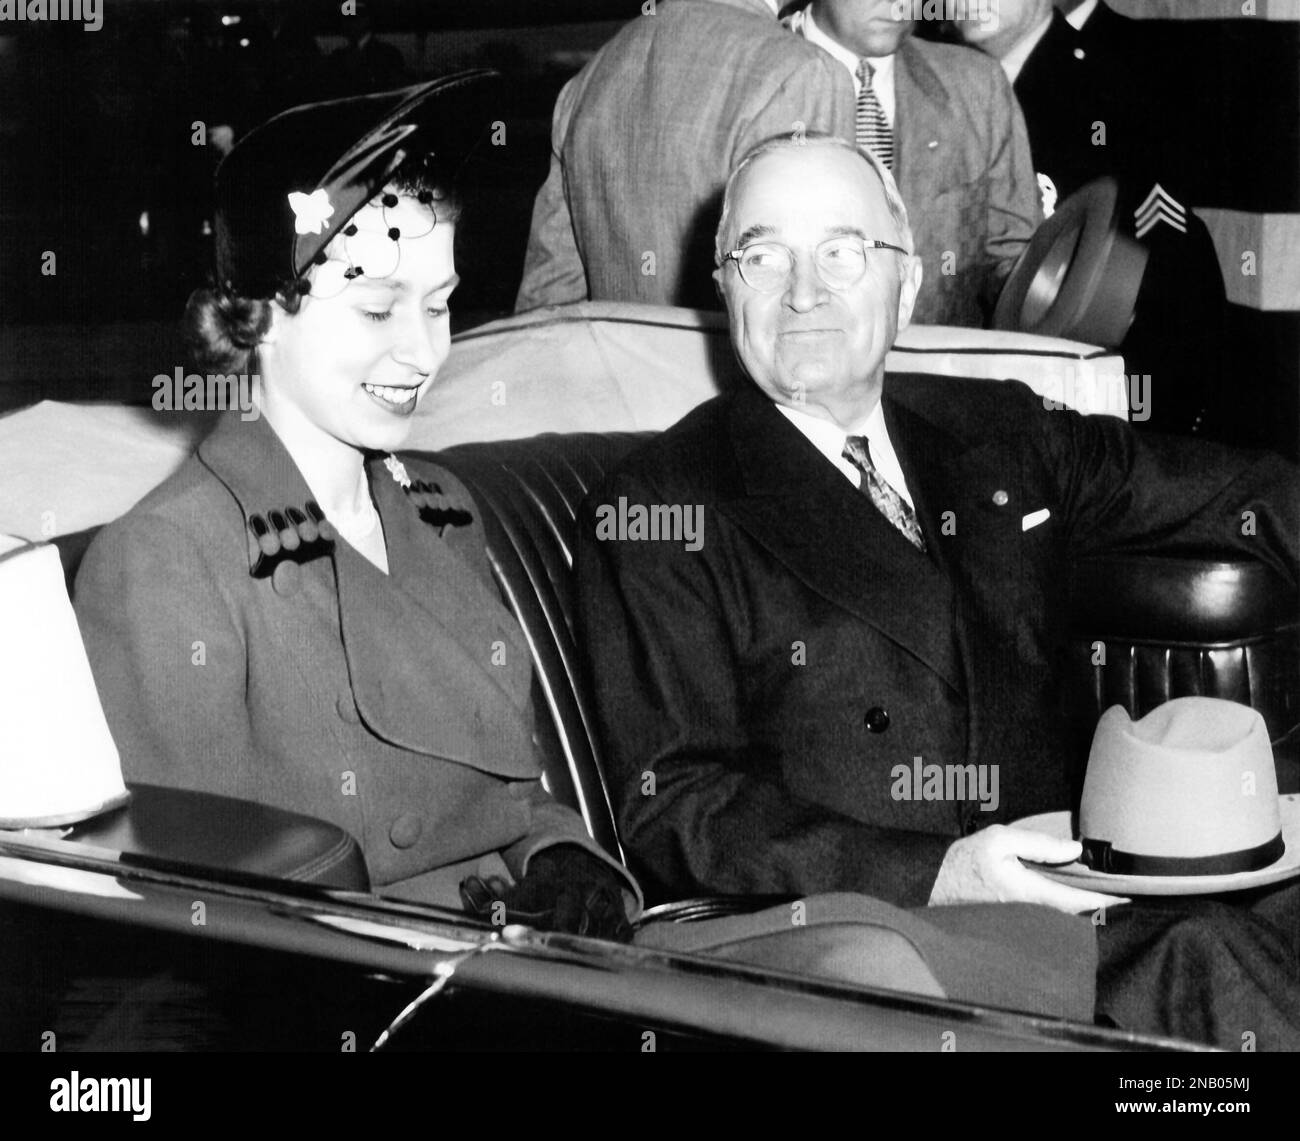 England's Princess Elizabeth (left) joins President Harry S. Truman in the Chief Executive's limousine for her ride to Blair House from Washington National Airport's Military Air Transport Service Terminal in Arlington, Virginia, on October 31, 1951. (USA) Stock Photo